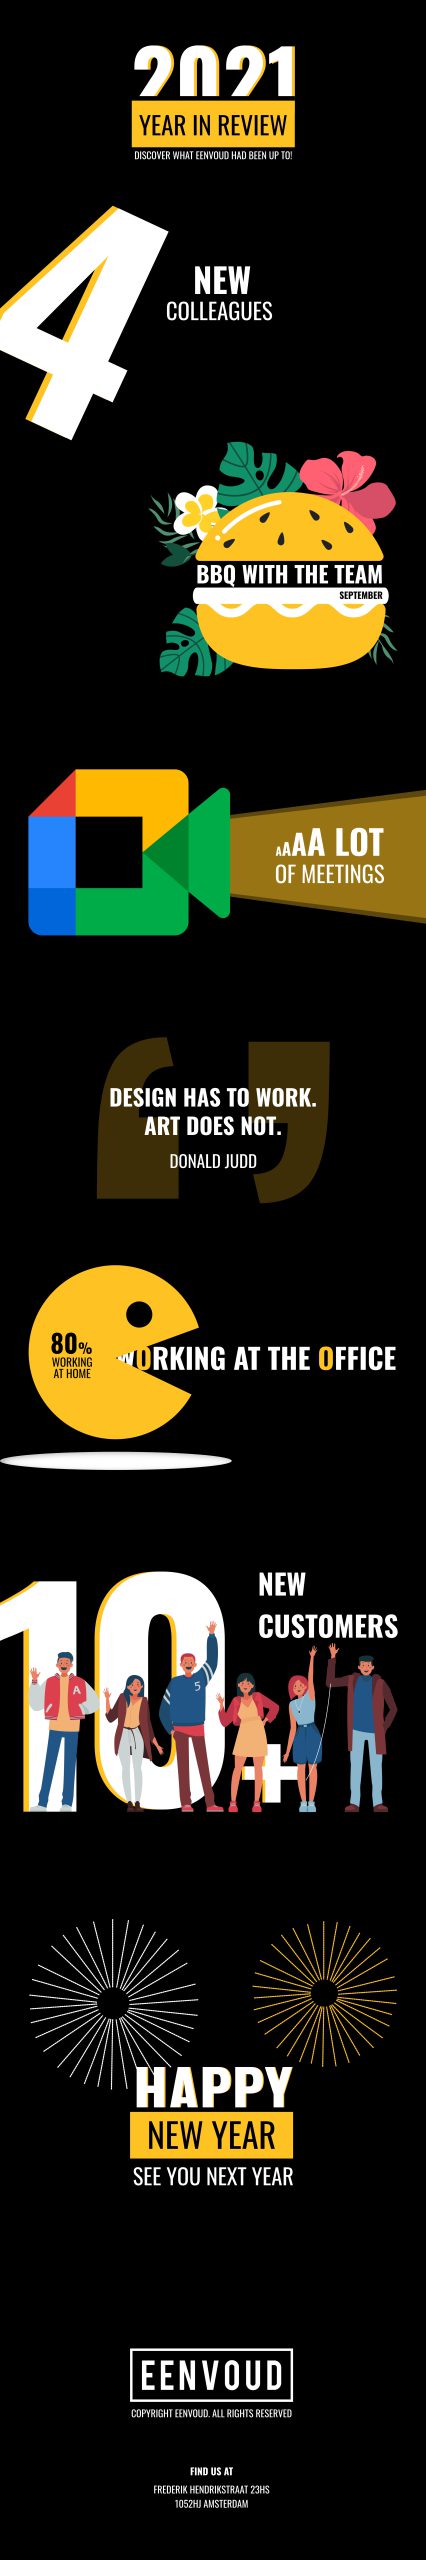 4 new colleagues, bbq with the team in september, a lot of meetings, quote "design has to work. art does not." by Donald Judd, 80% working at home, 10 new customers. Happy new year. See you next year.